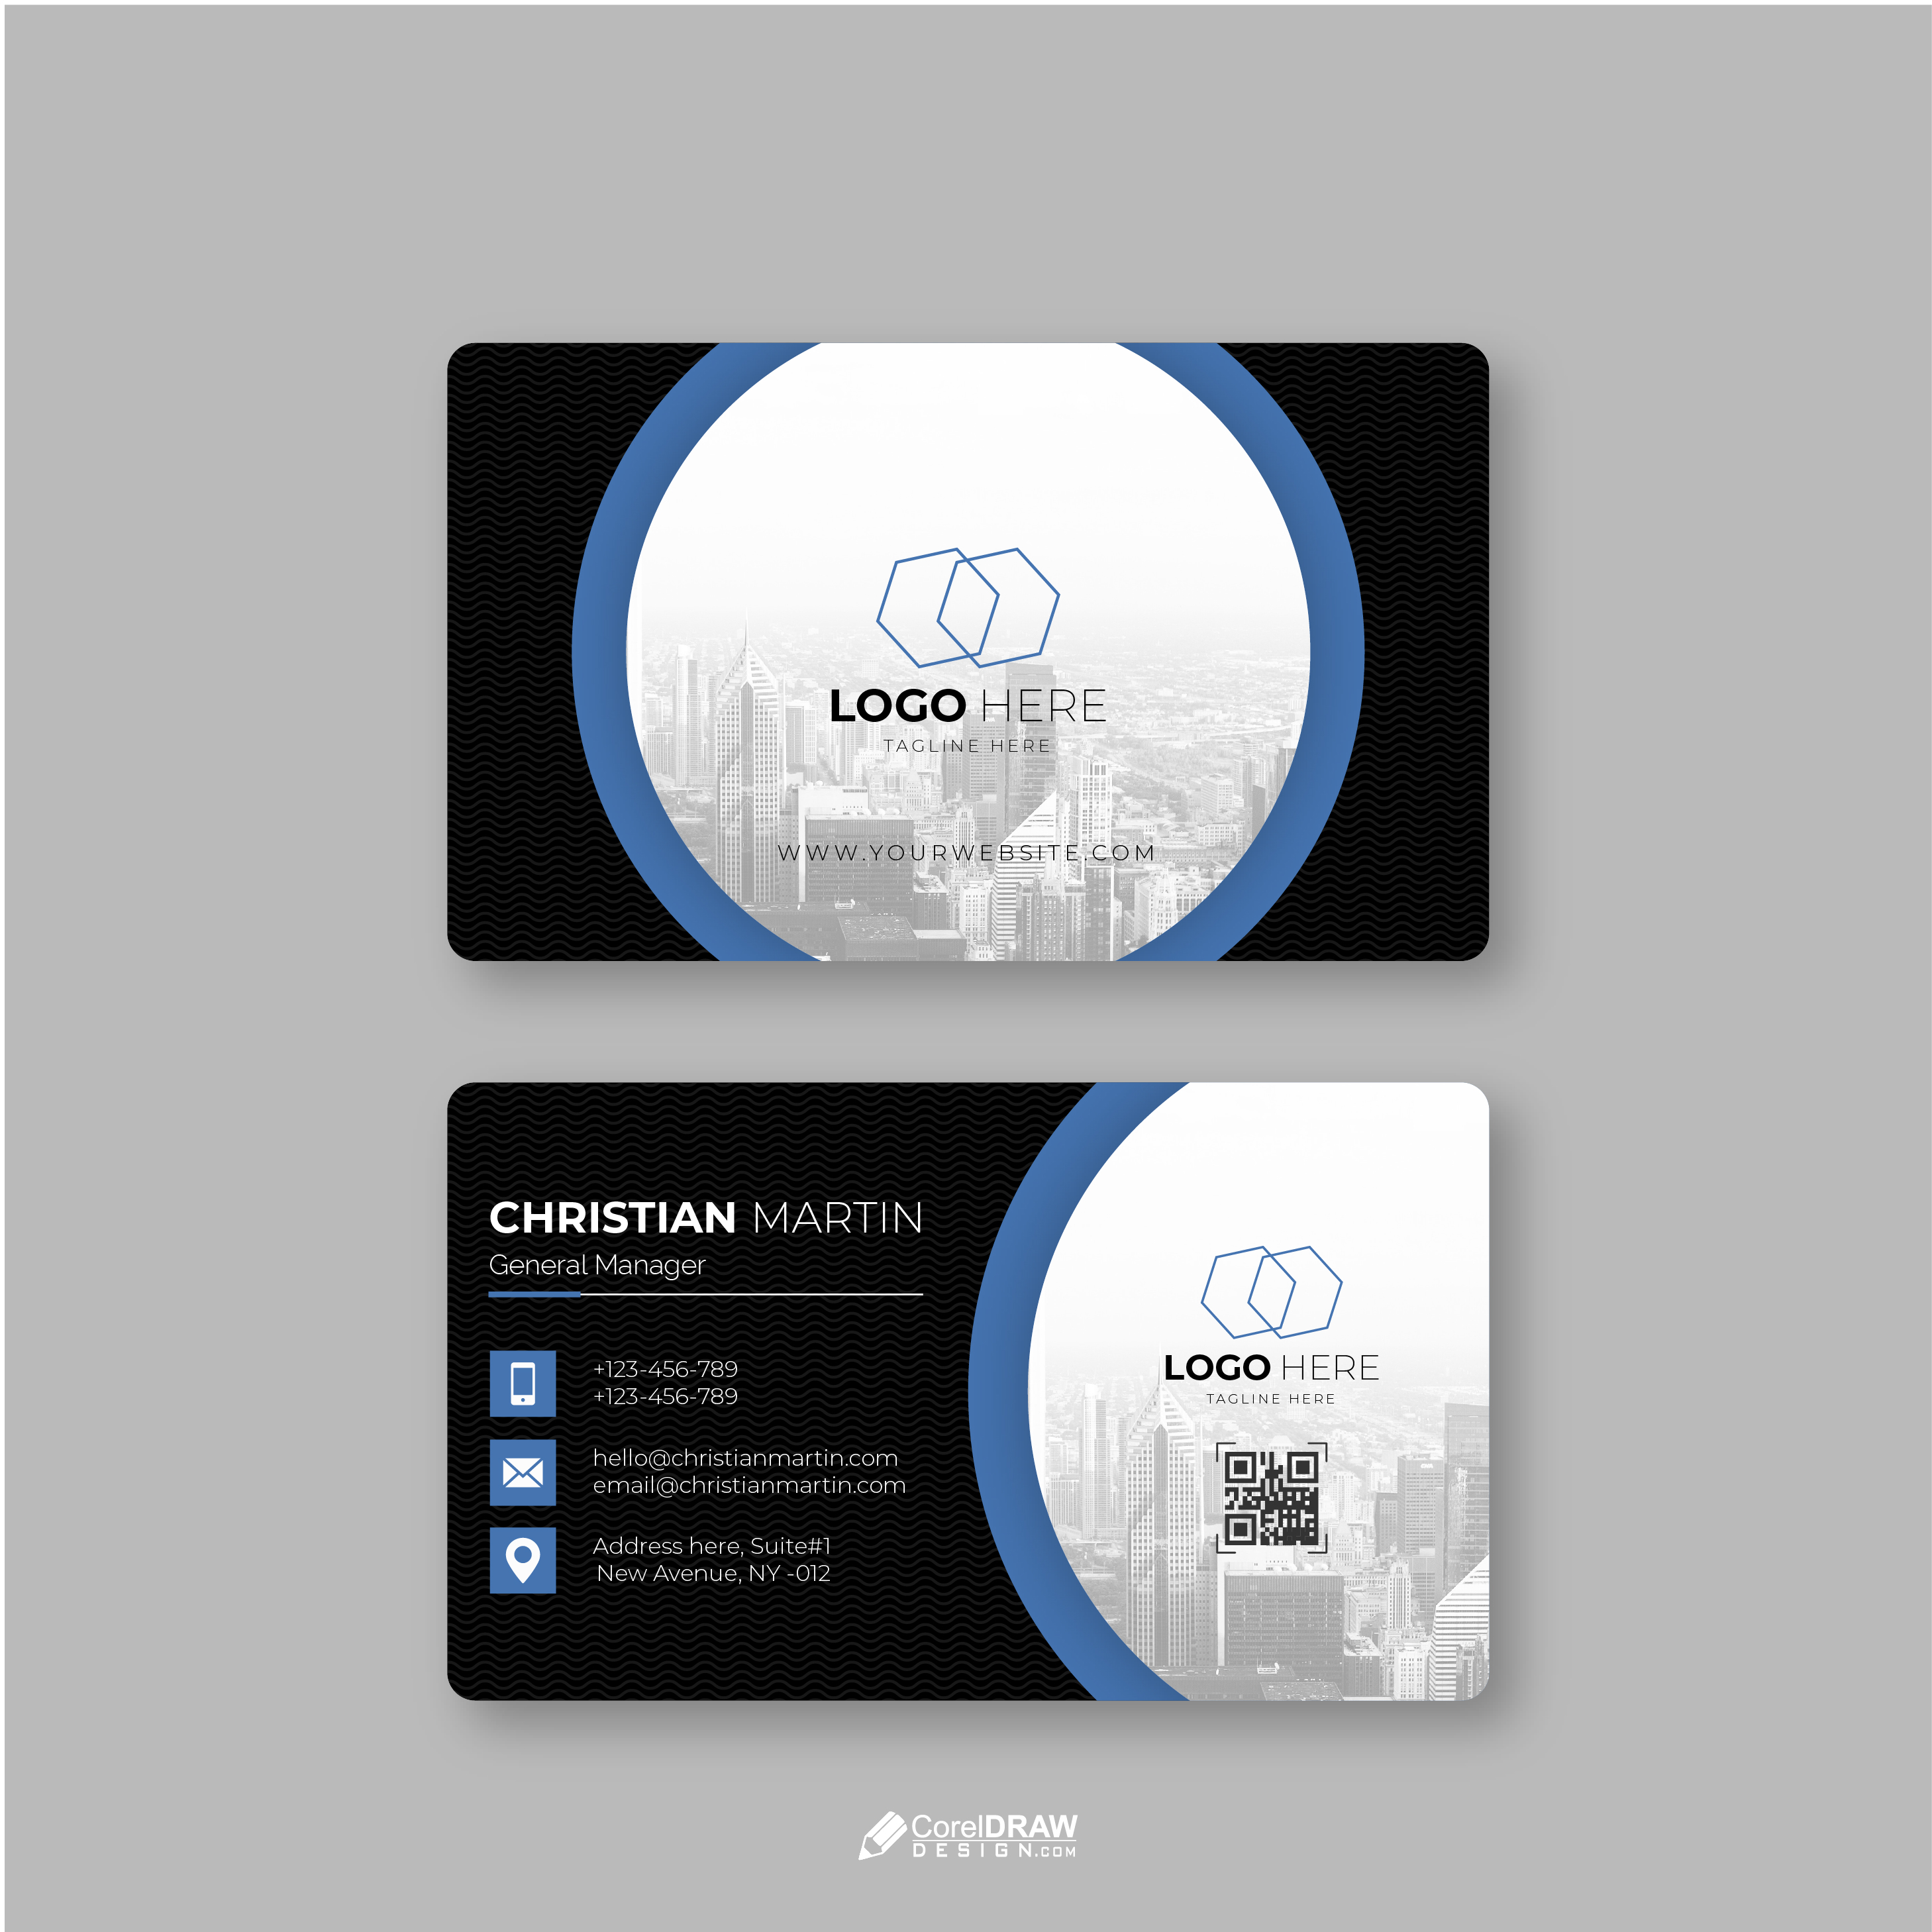 Abstract Professional  Corporate Company Business Card